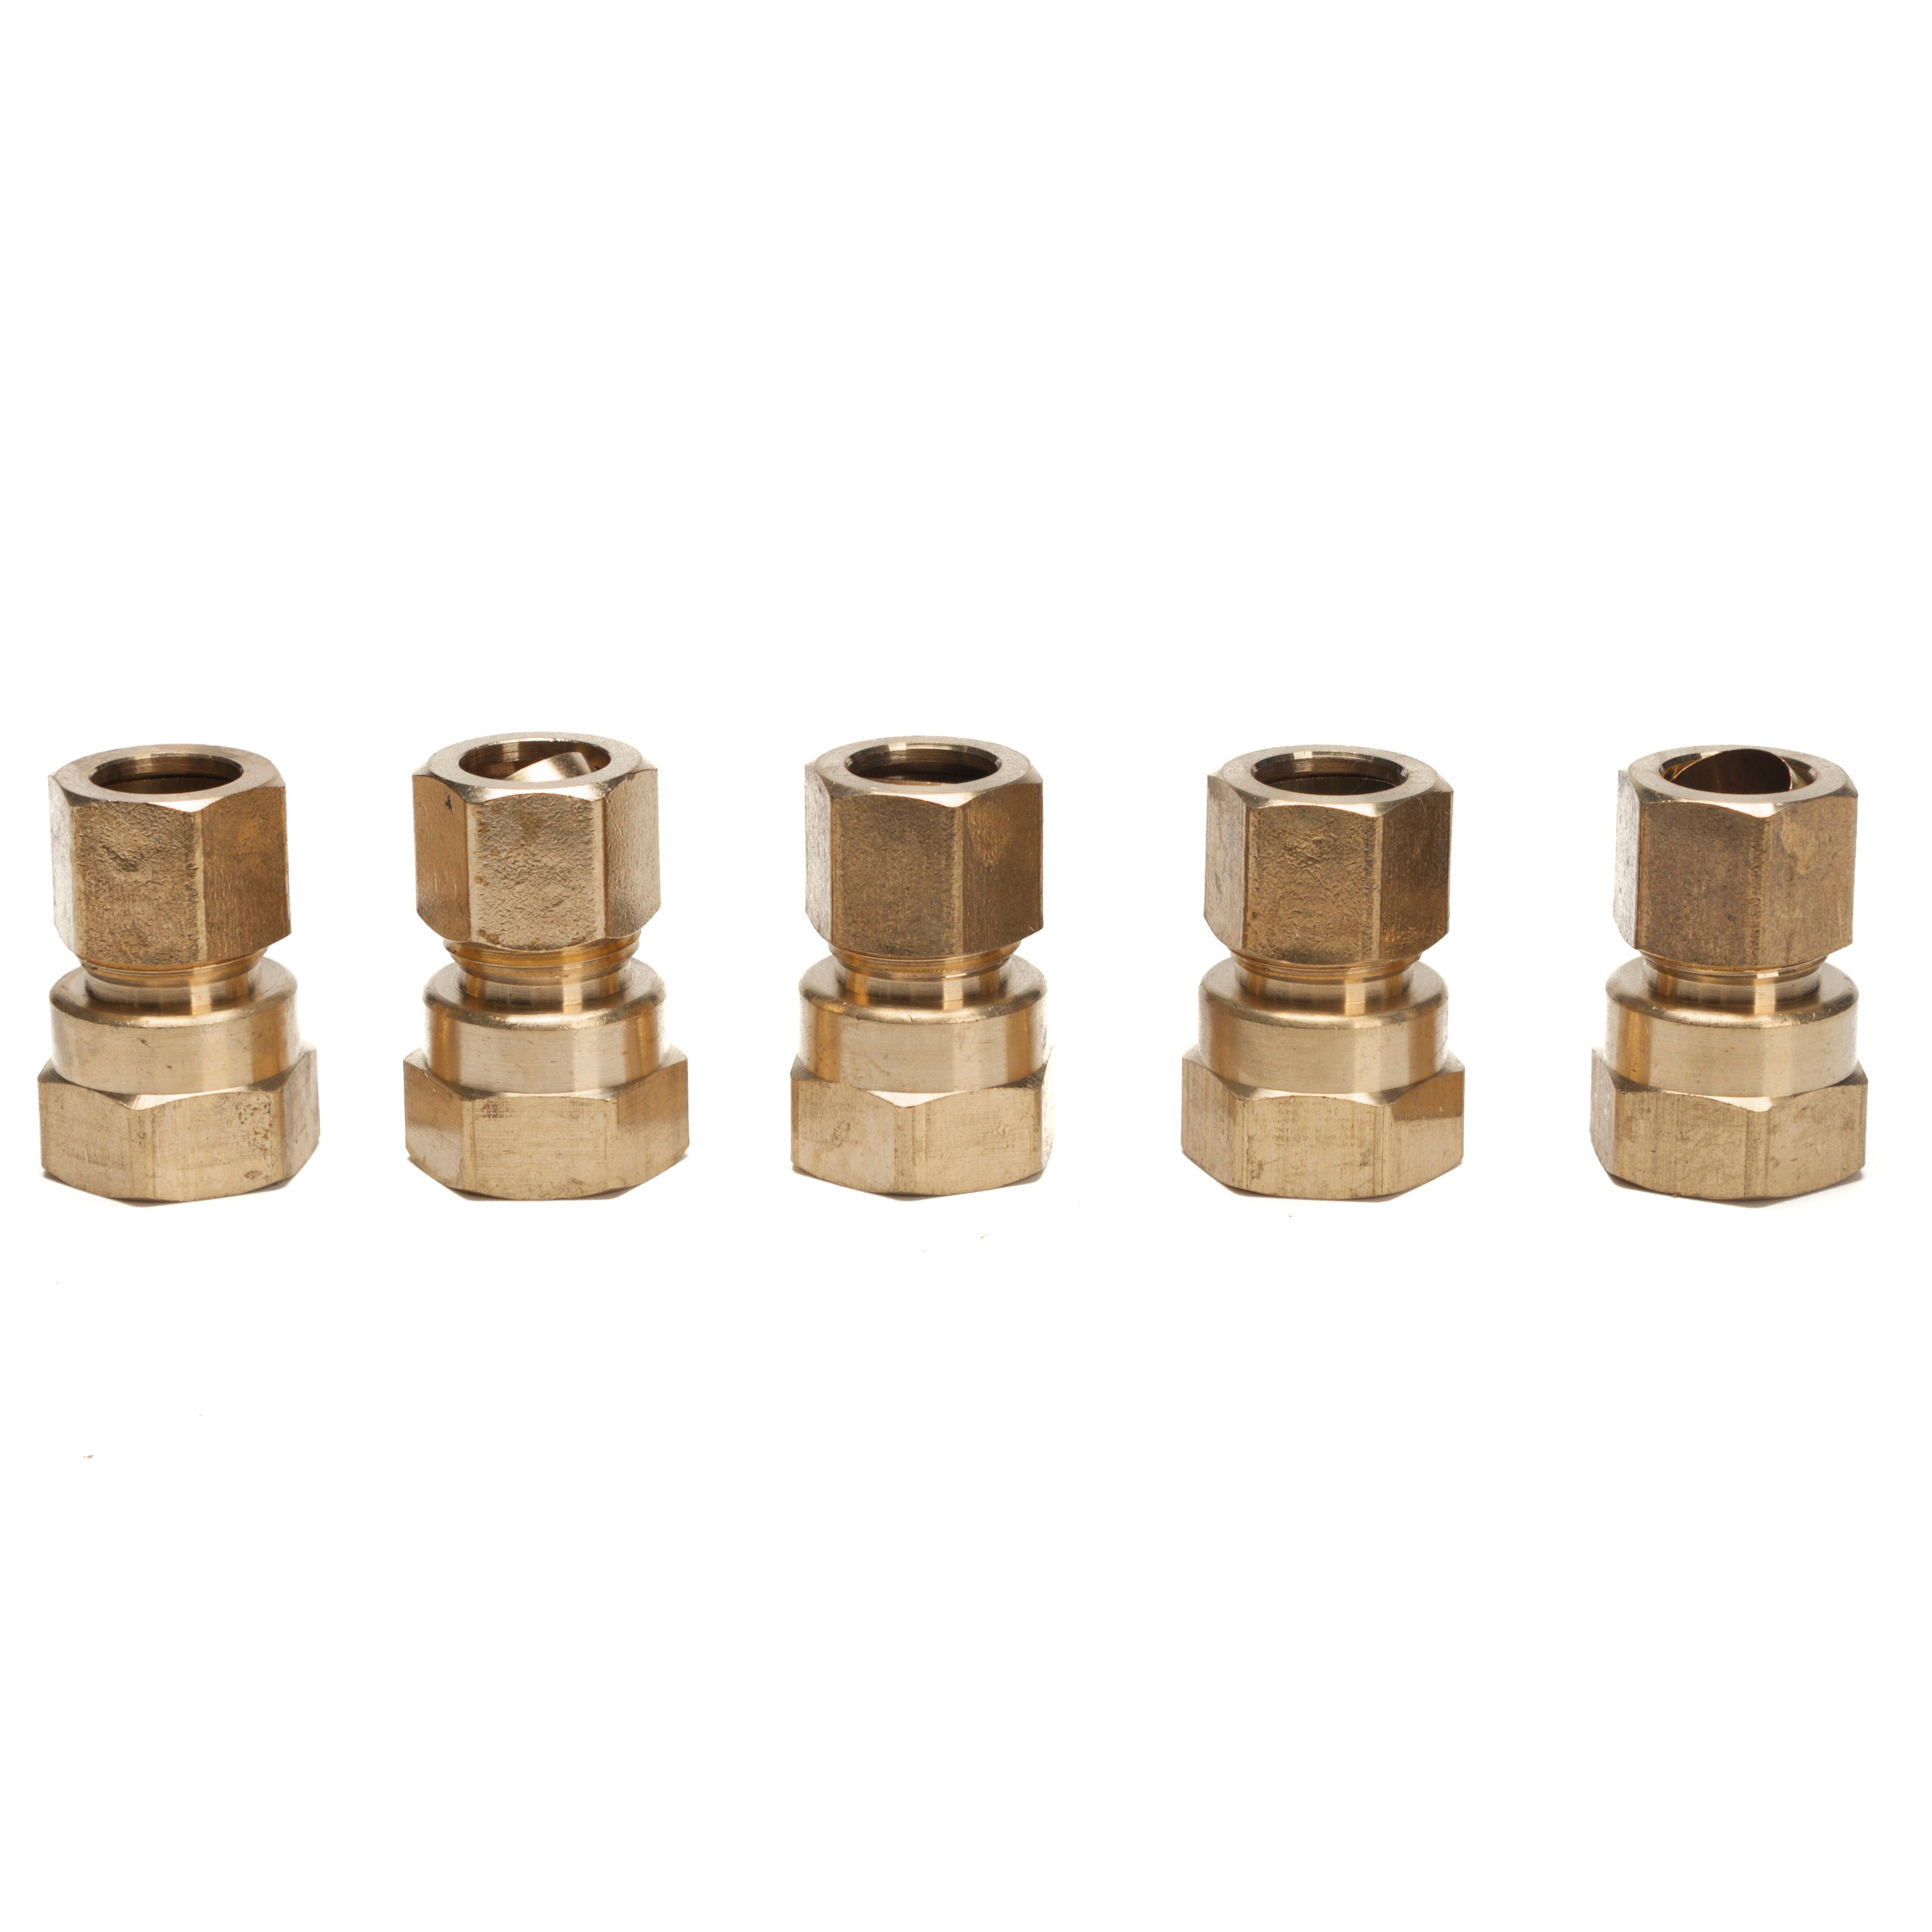 LTWFITTING Brass 1/2-Inch OD x 1/2-Inch Female NPT Compression Connector Fitting(Pack of 5)